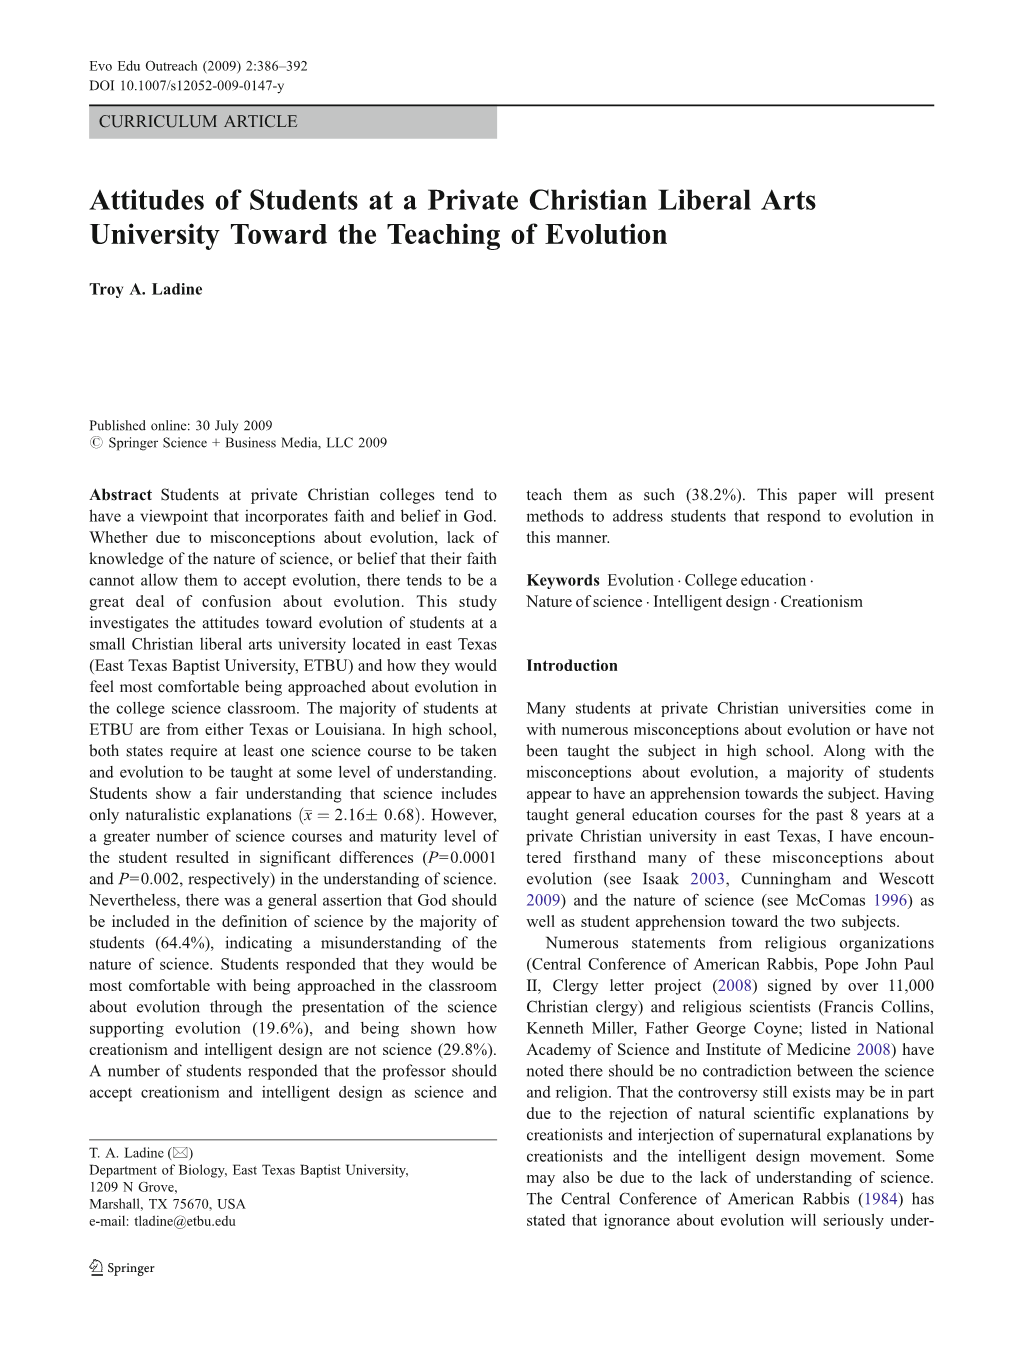 Attitudes of Students at a Private Christian Liberal Arts University Toward the Teaching of Evolution